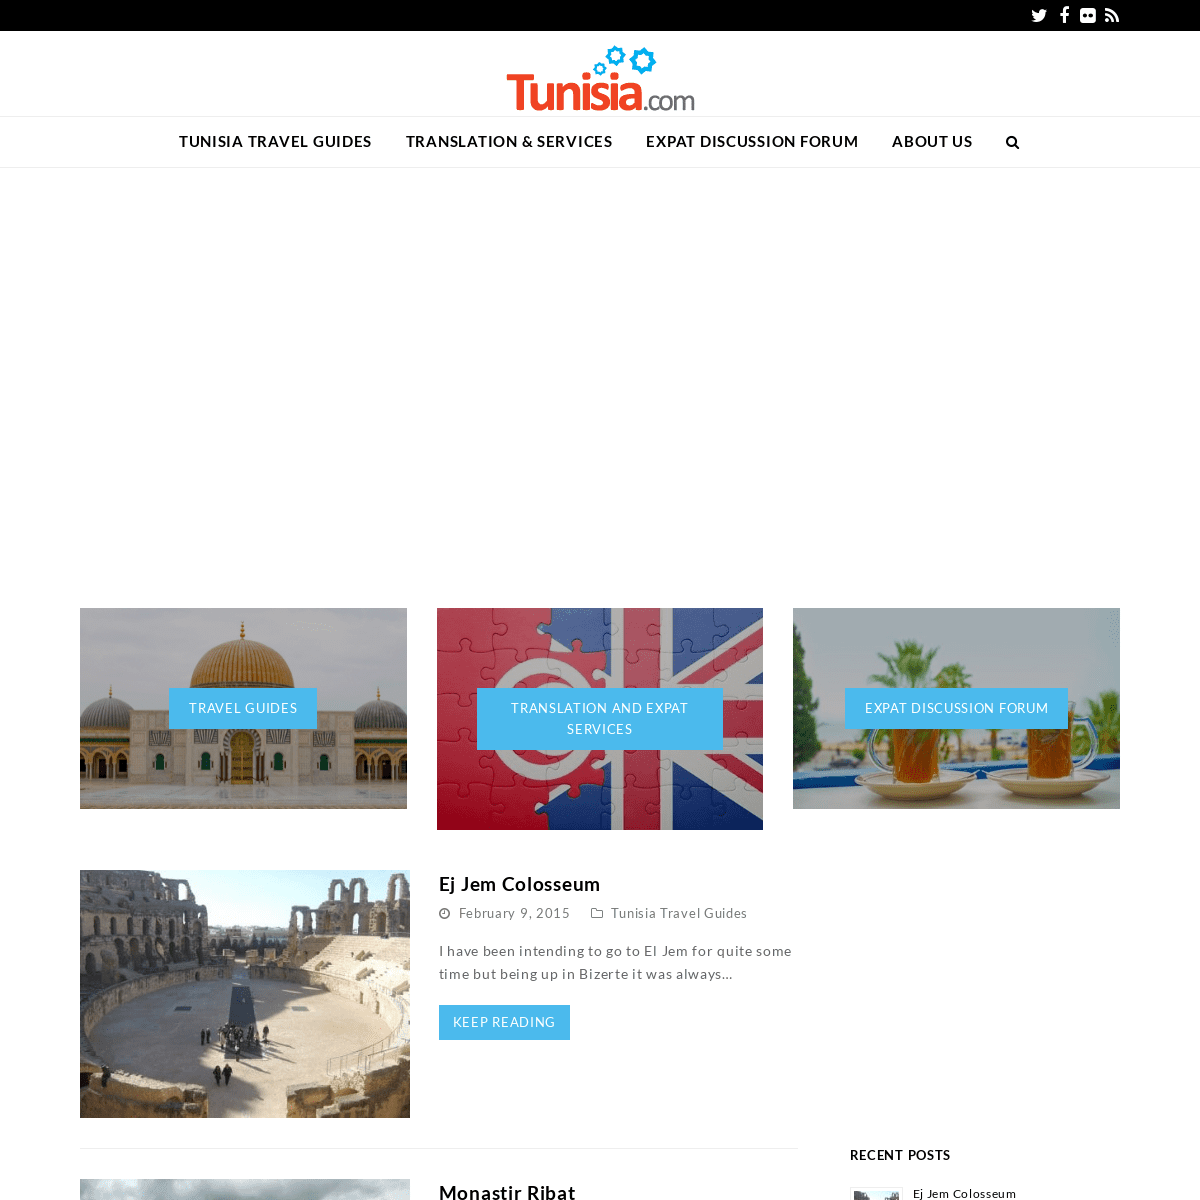 A complete backup of https://tunisia.com